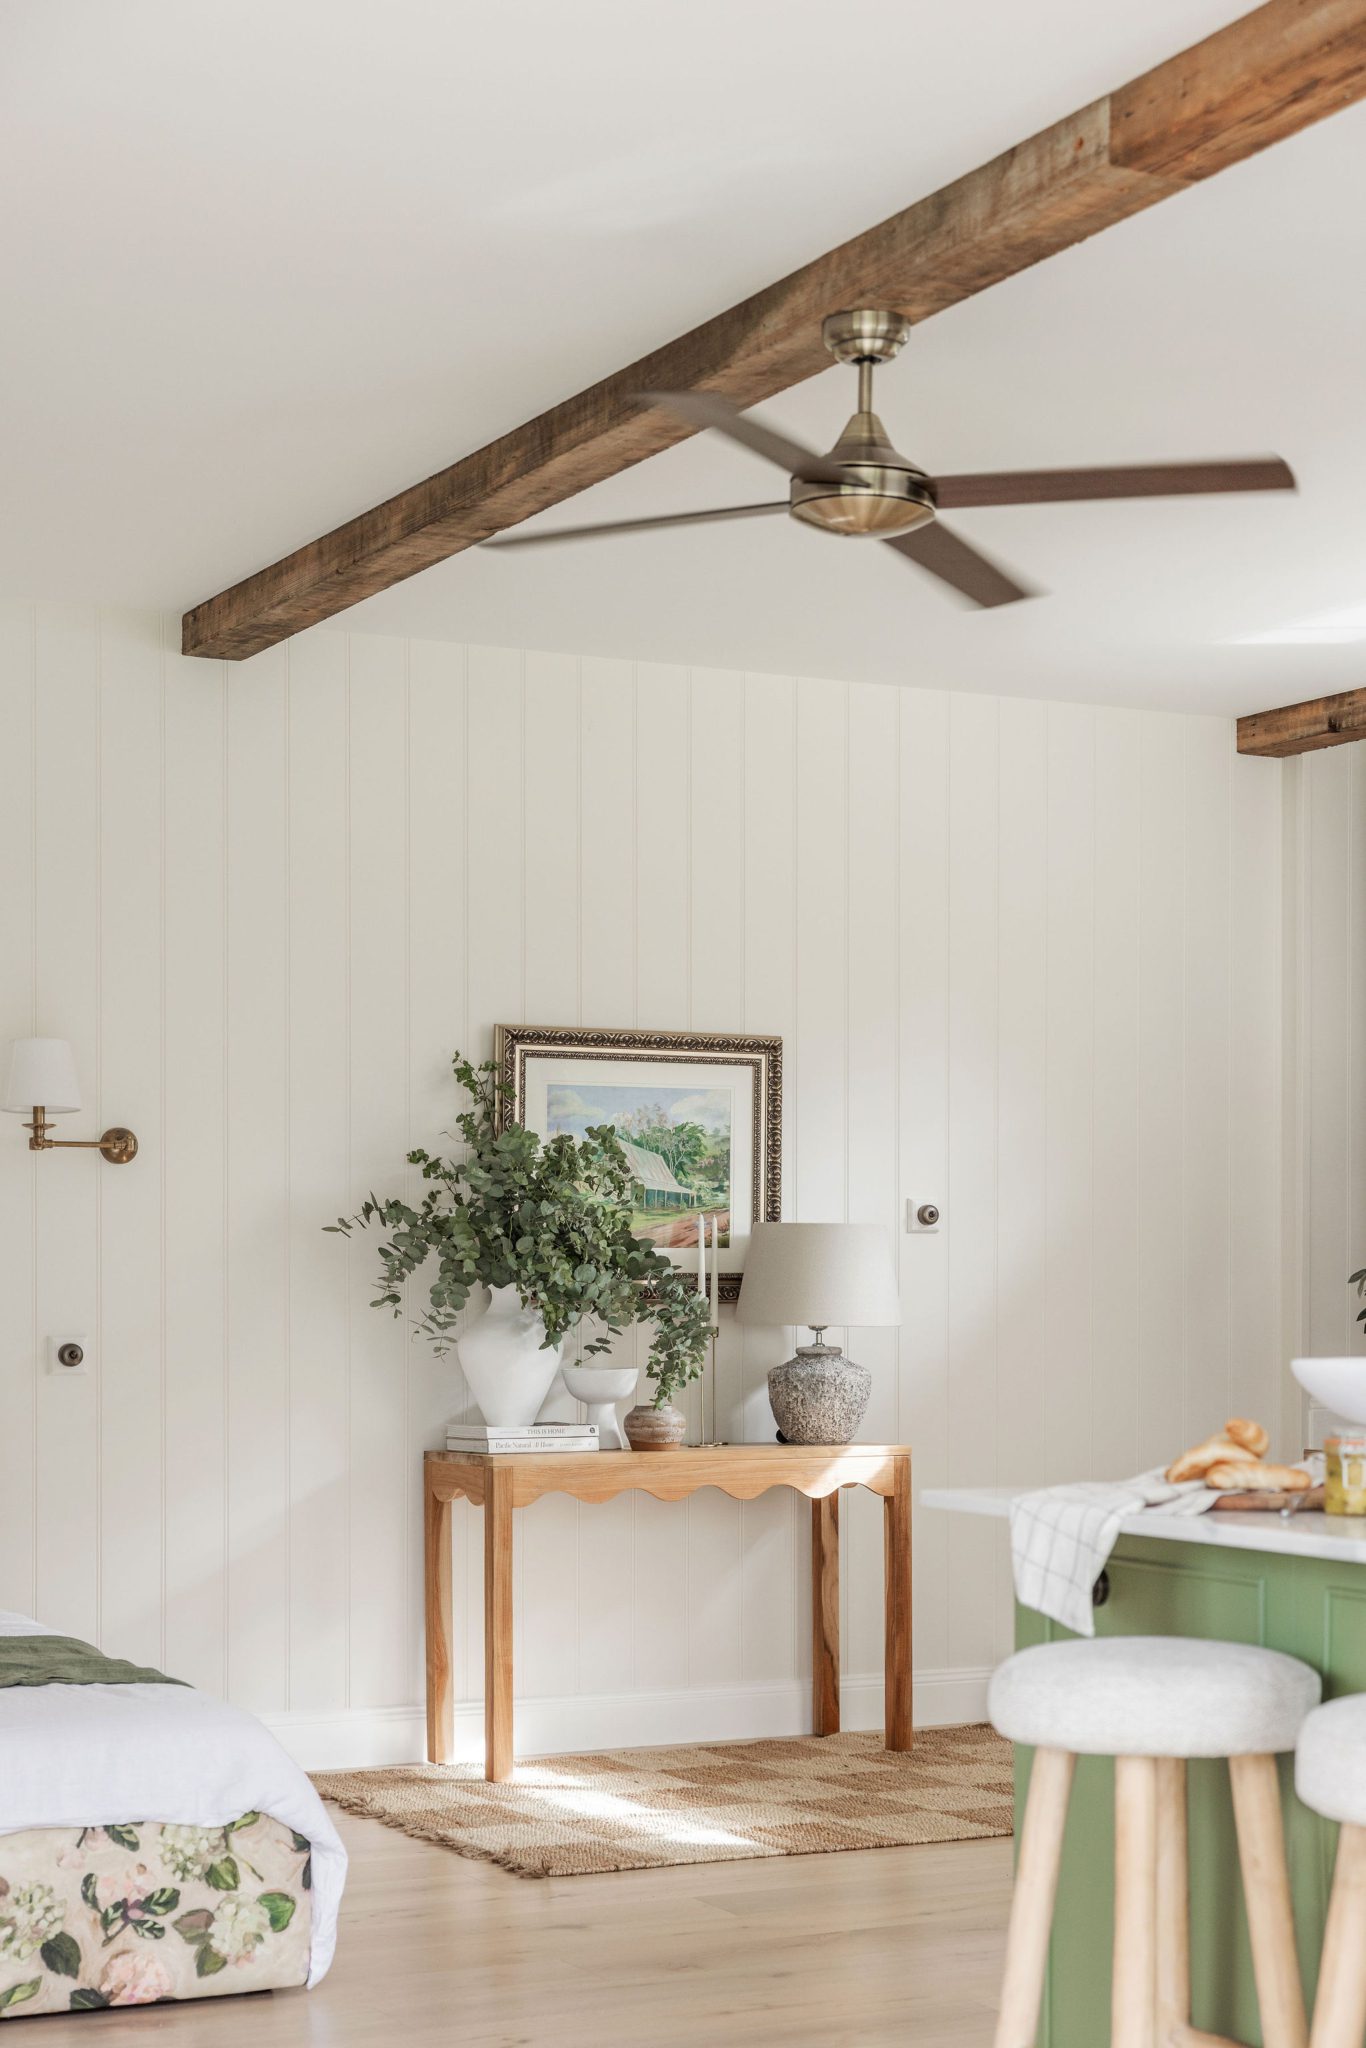 The Country Cottage – Studio